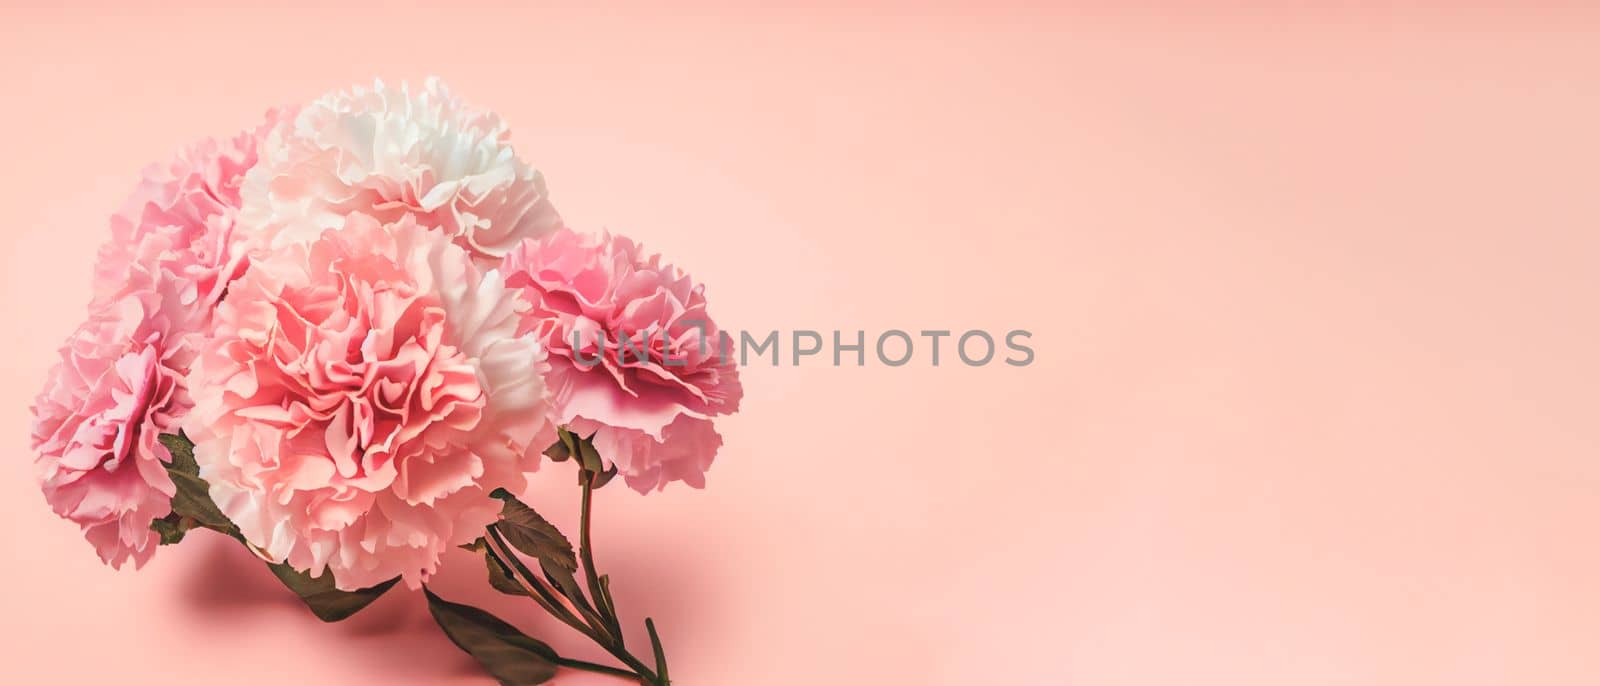 Carnation bouquet on pastel pink background with copy space. 3D illustration concept for Mother's Day holiday greetings card. Wide angle format banner. by FokasuArt